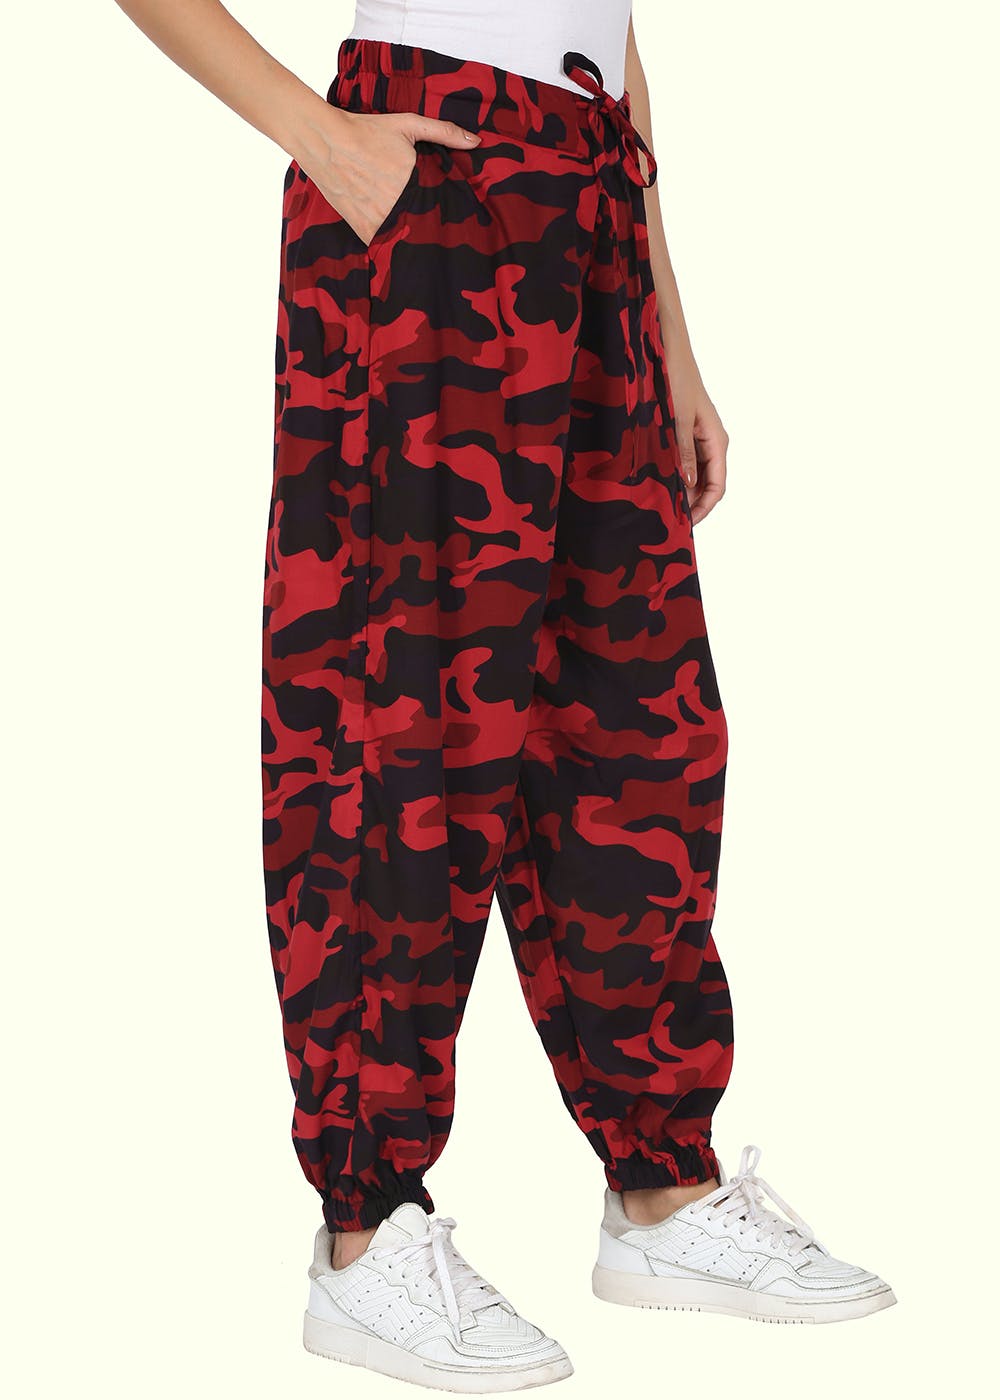 Hot Men Camouflage Harem Pants Trouser Drop Baggy Loose Hippie Tapered  Casual  eBay